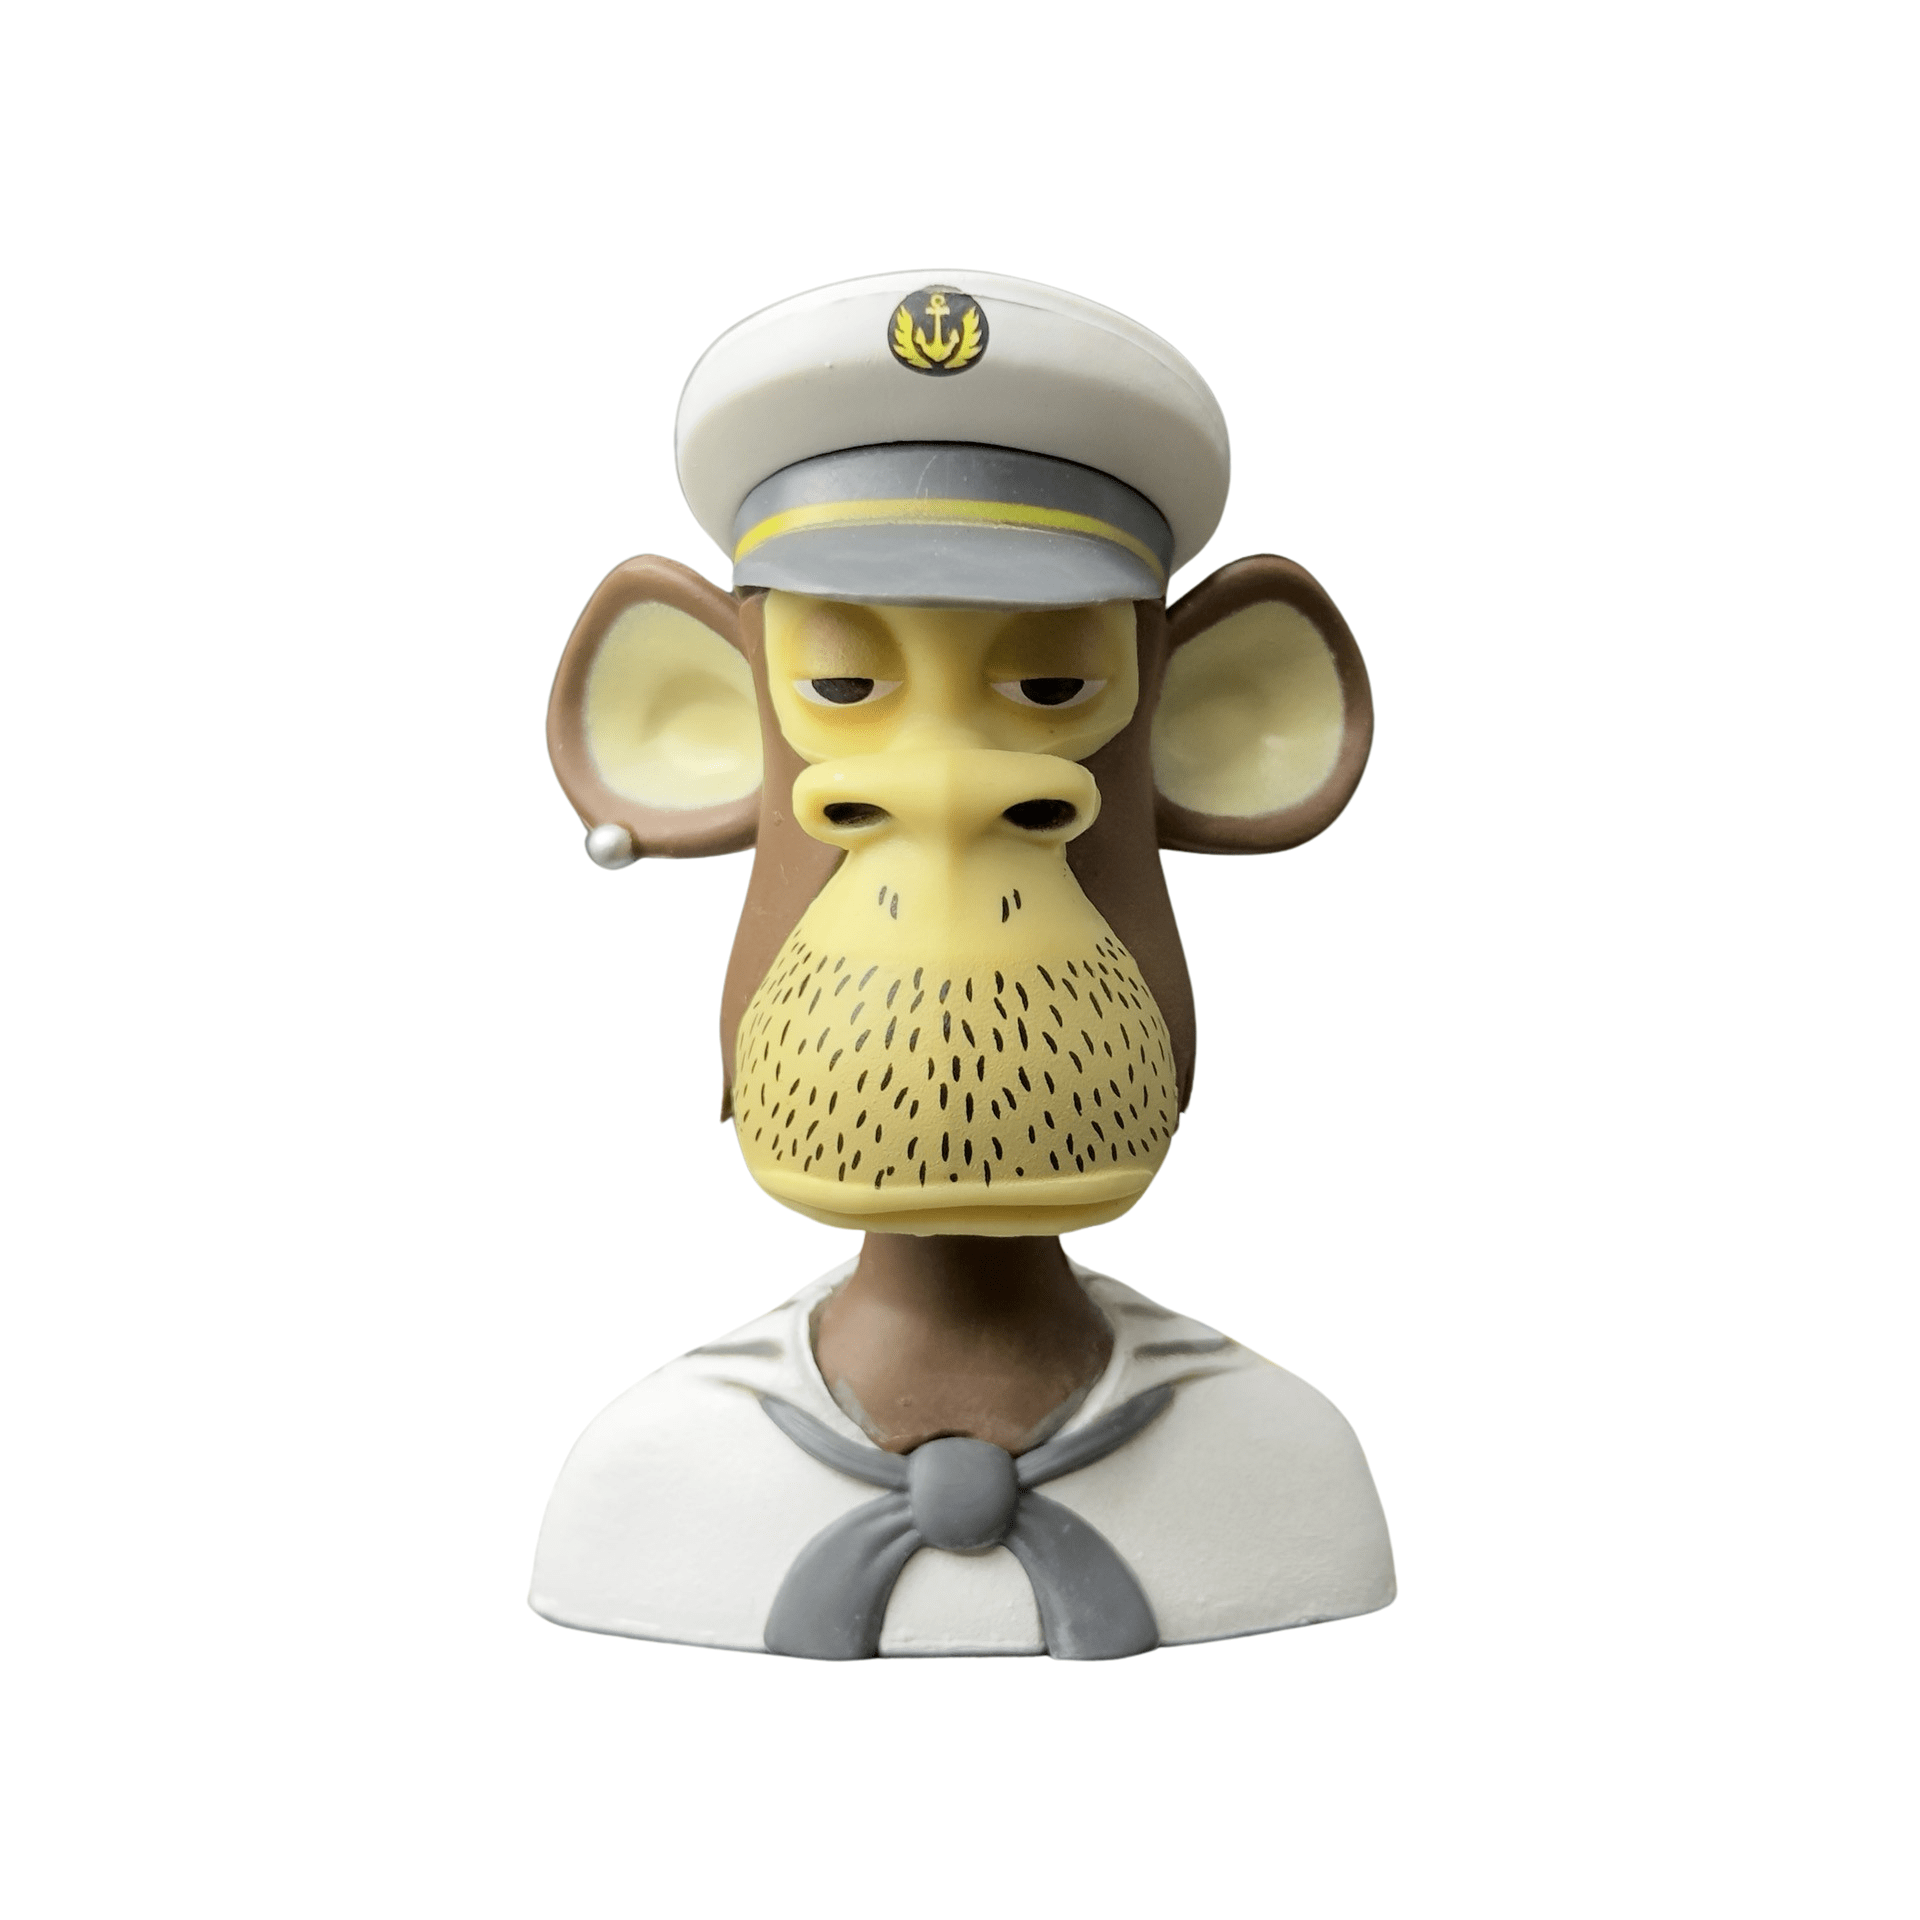 NFTY Figs Series 1 3 Figure By Bored Ape Yacht Club (#2159) 01 | Monkey Paw Mexico